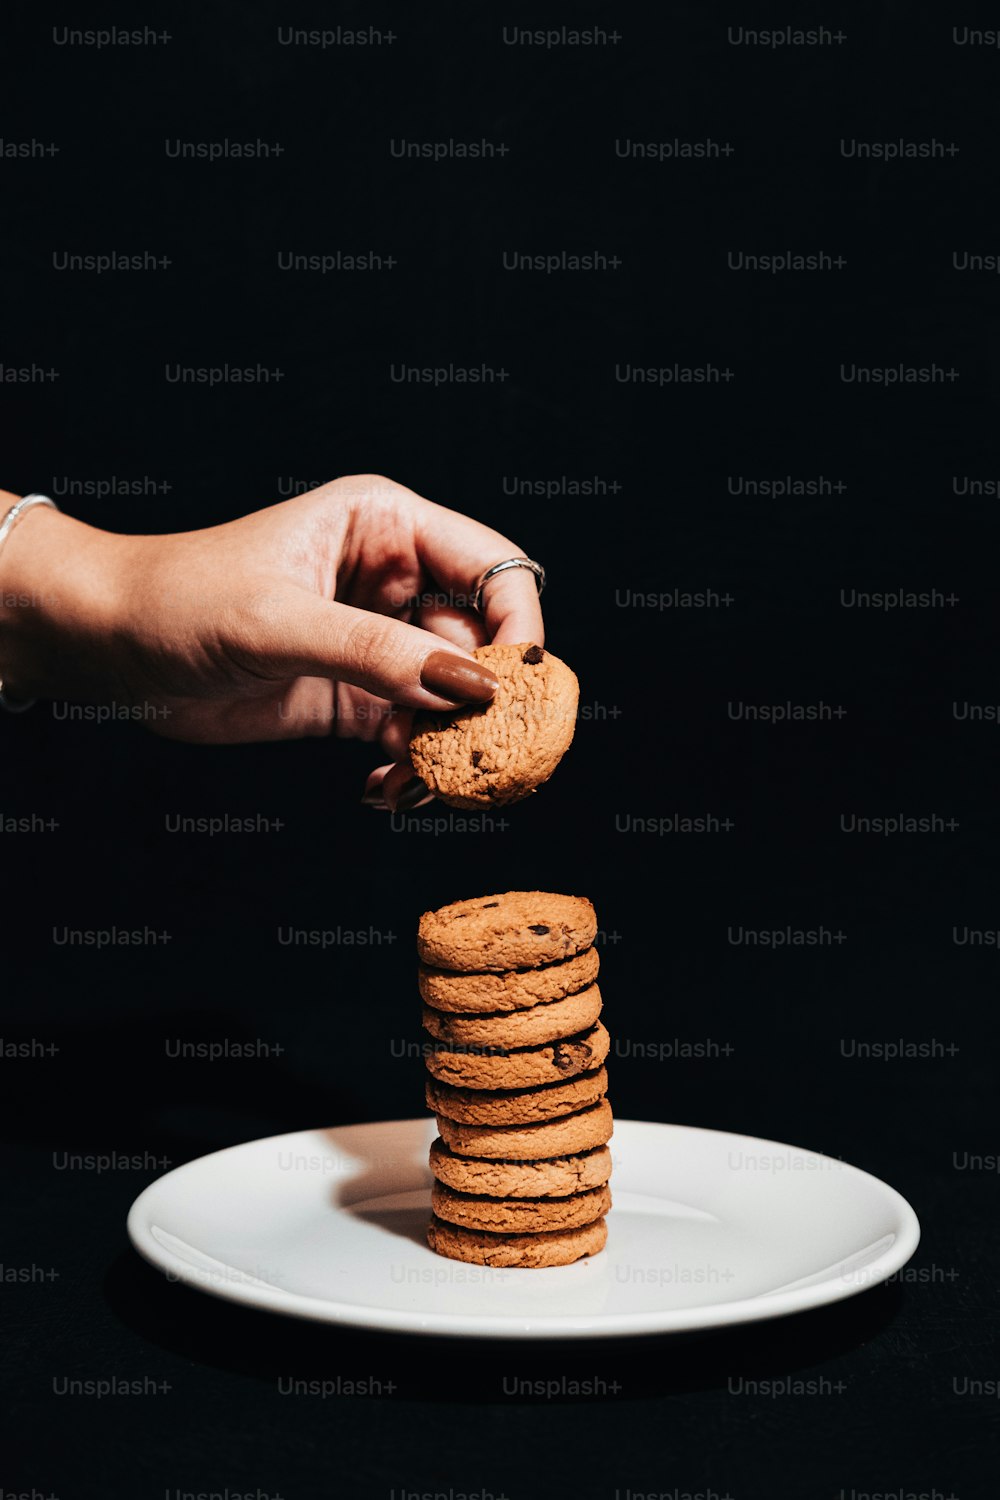 a hand reaching for a cookie on a plate